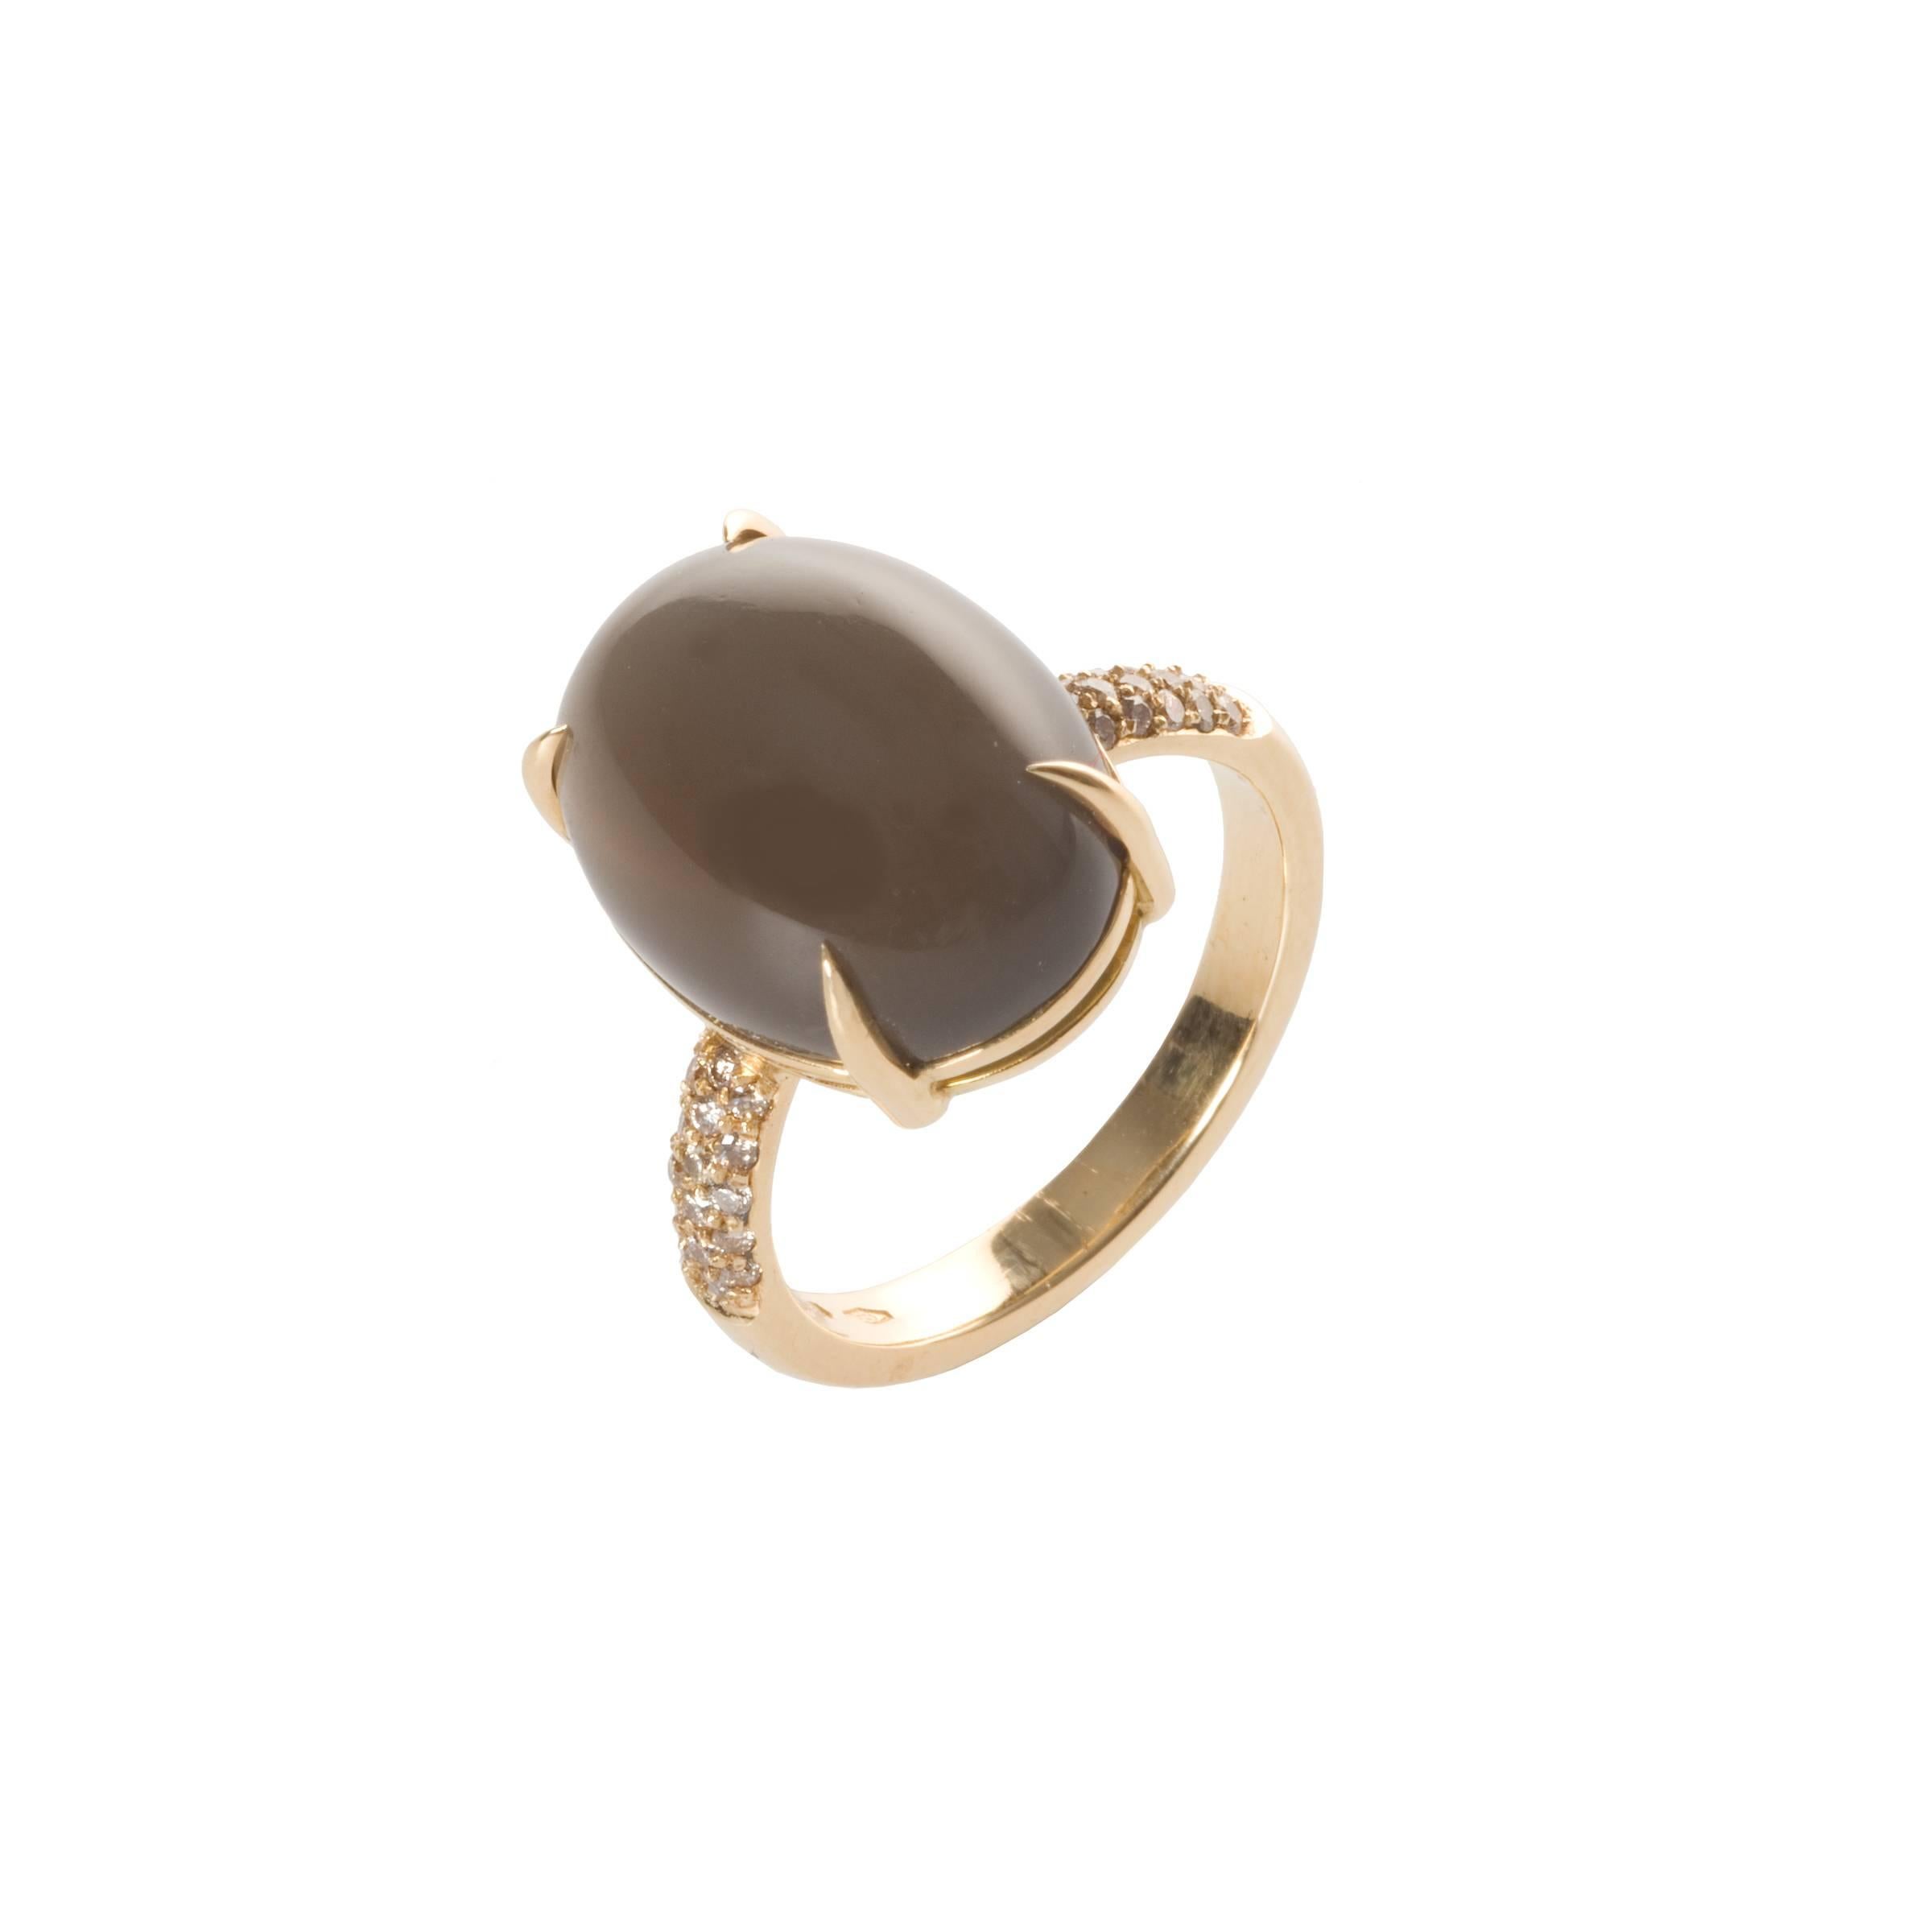 This beautiful Dark Grey Moonstone has been set in an 18kt yellow gold band with 32 pavé Fancy Champagne Diamonds. 

Handmade by a fifth generation Italian goldsmith no two pieces are the same. We pride ourselves in having hand cut the 9,72ct